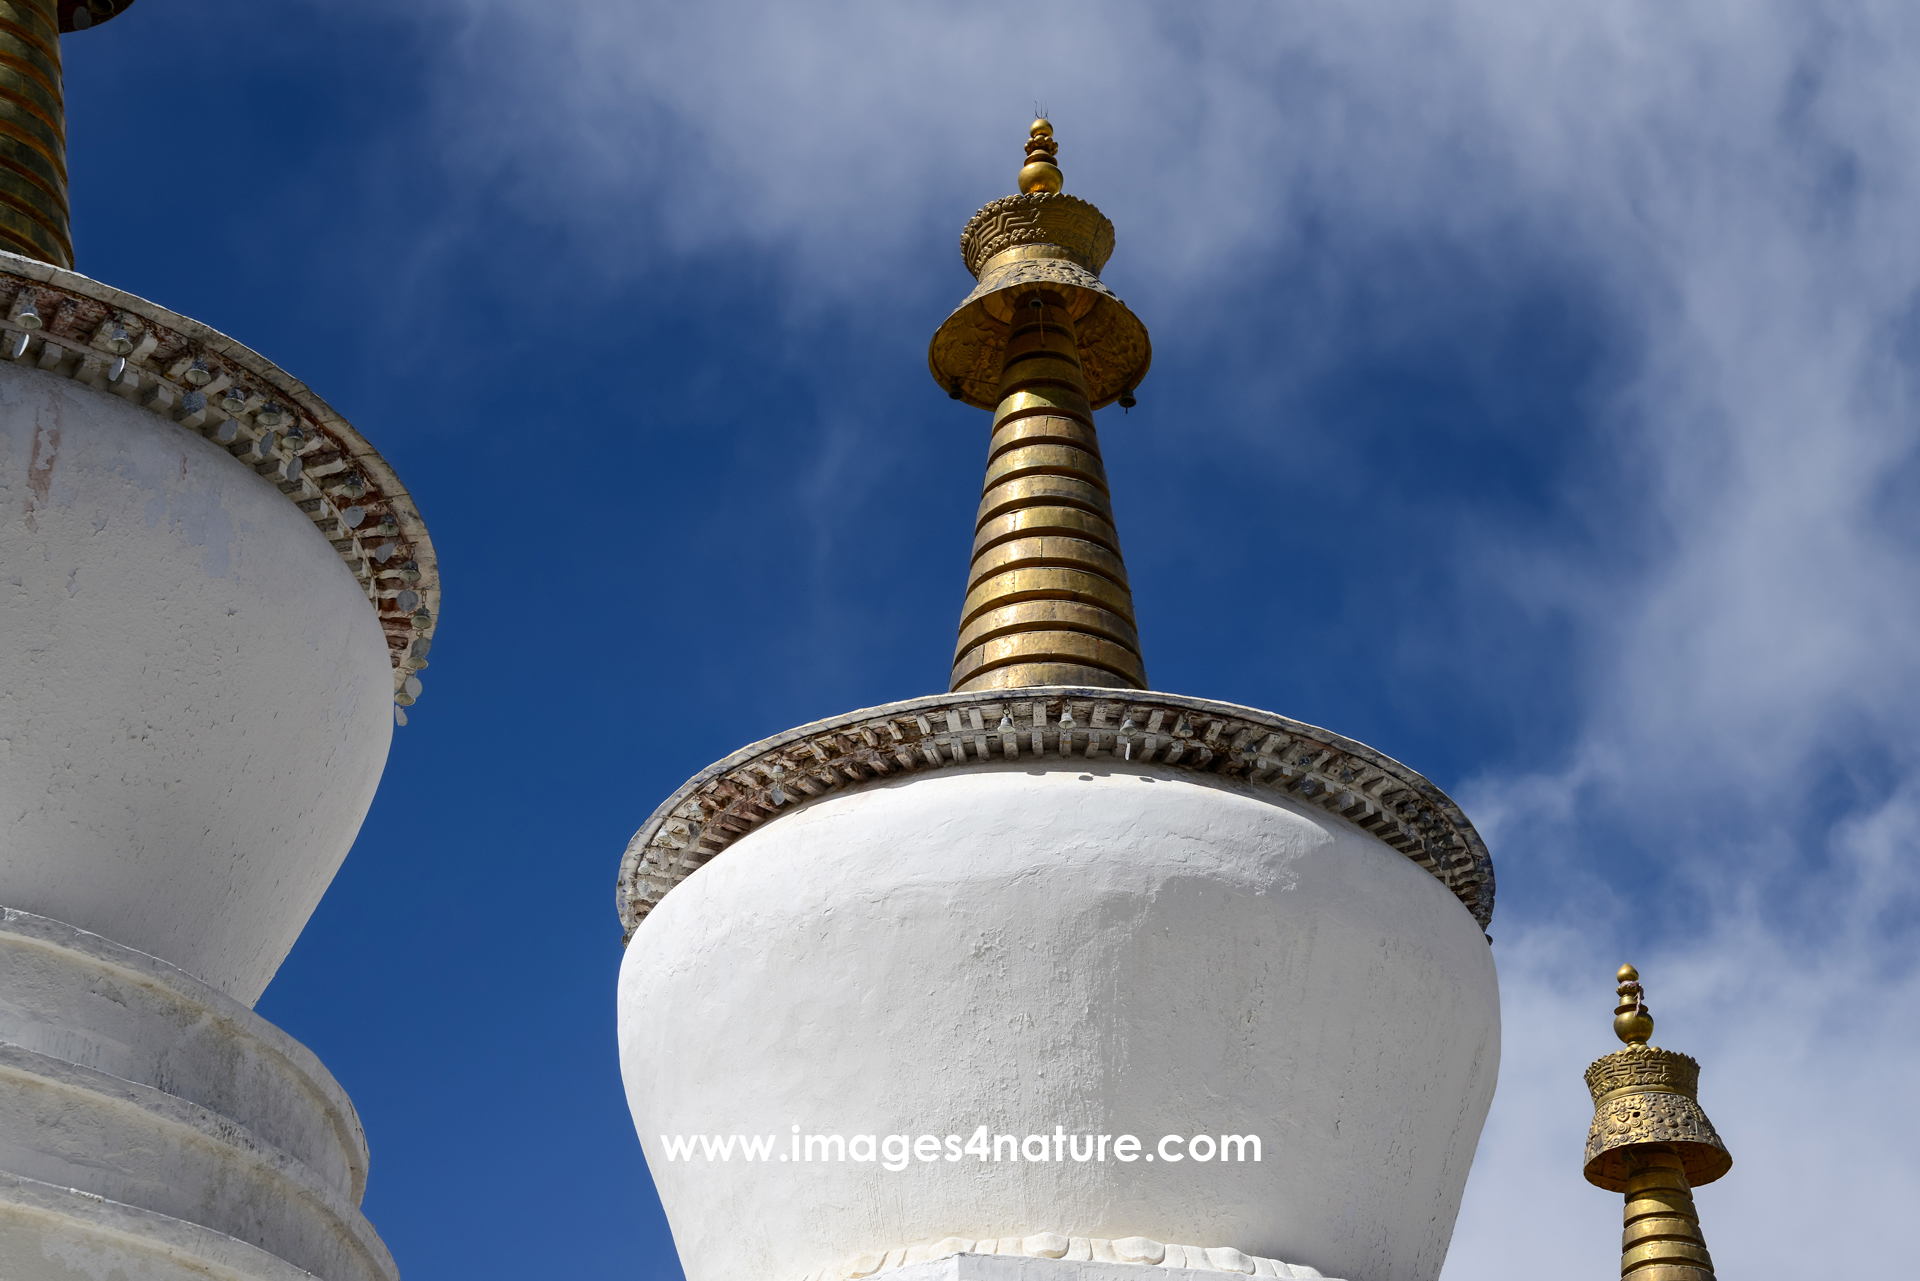 Low-angle view of white Tibetan stupas with golden top against blue sky